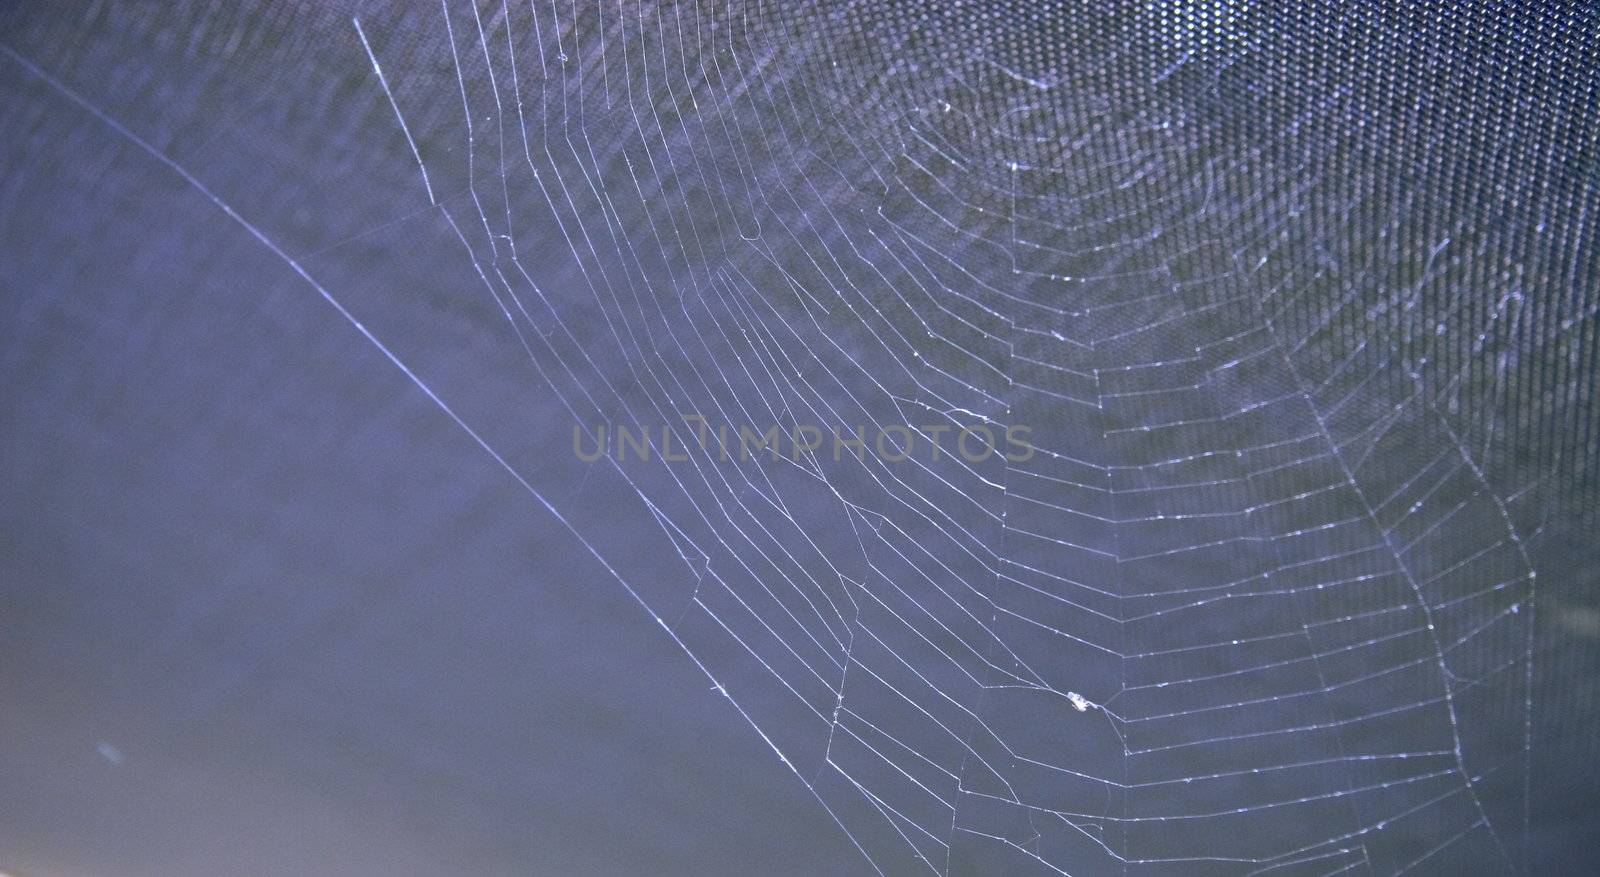 strong spiders web  by leafy